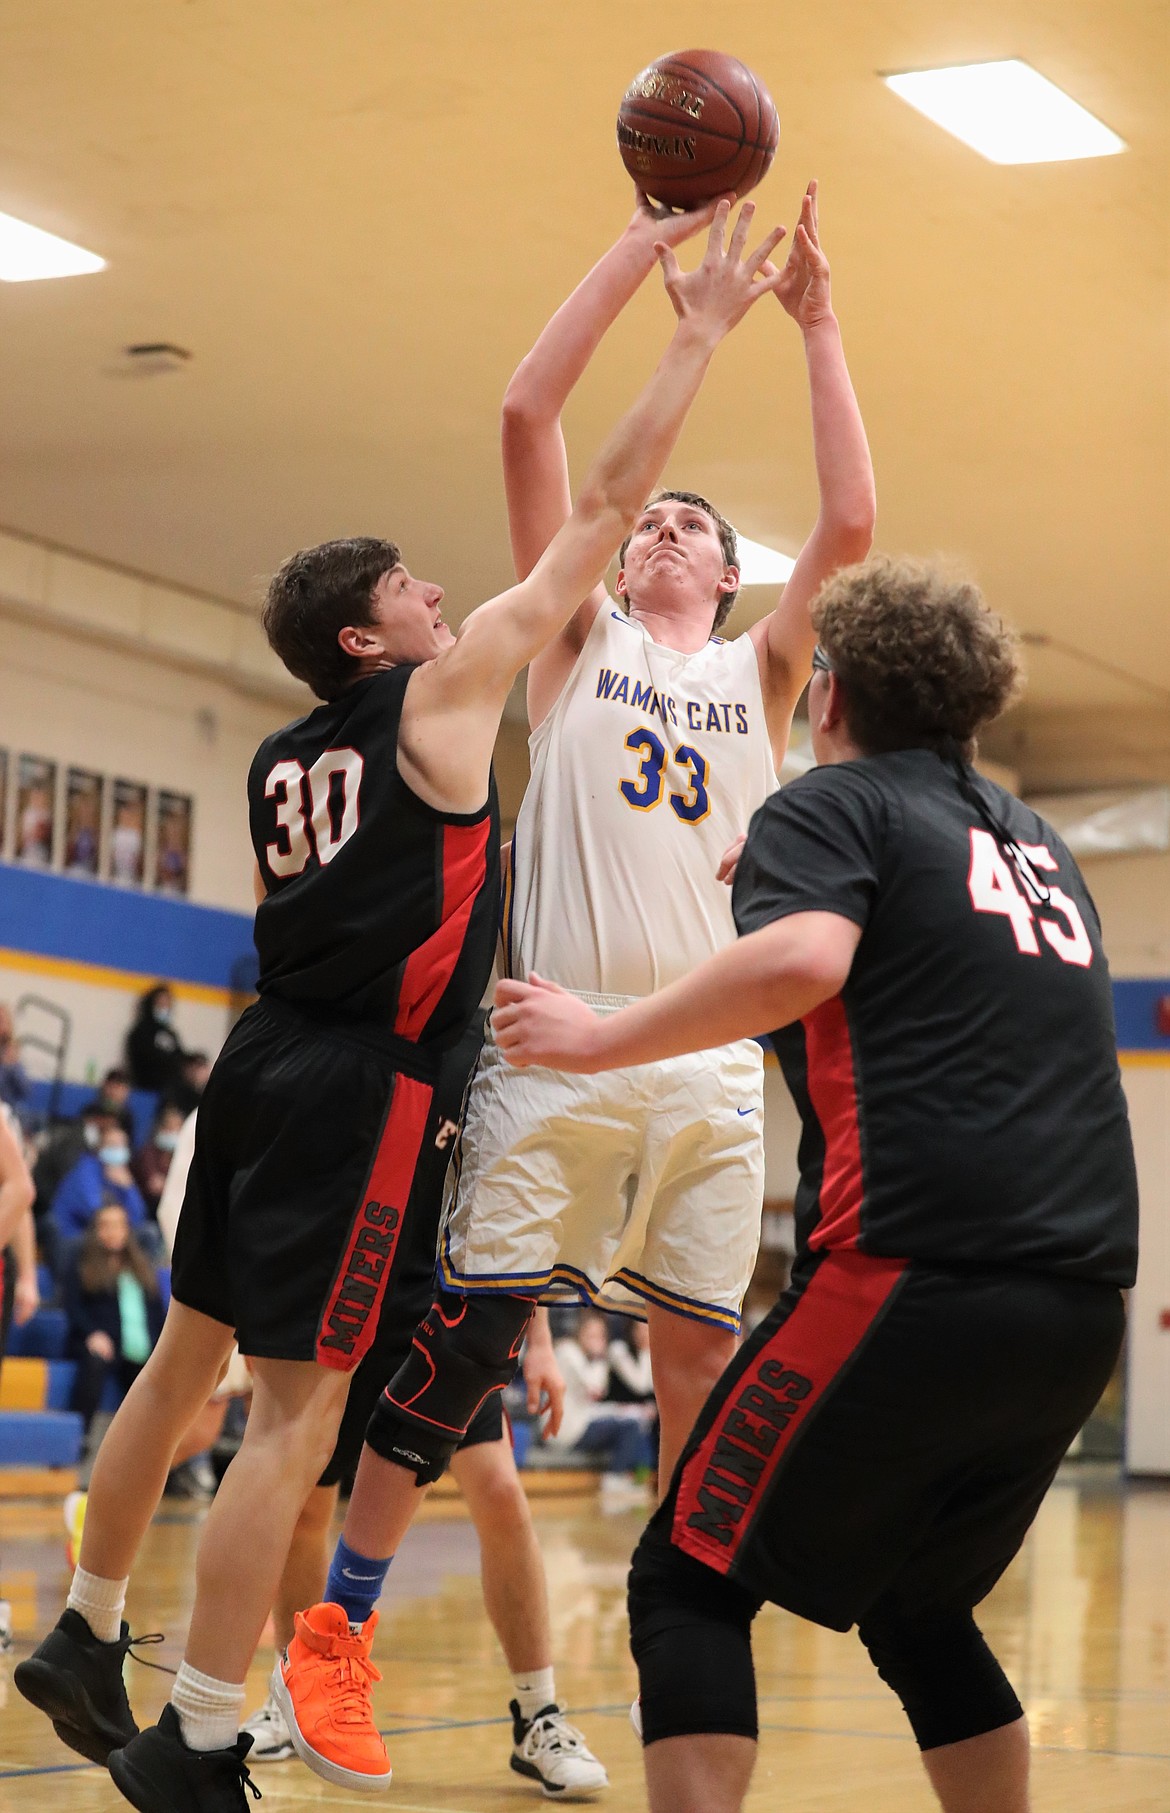 Senior Chris Wade attempts a shot over a pair of Wallace defenders during a game on Feb. 1 at CFHS.